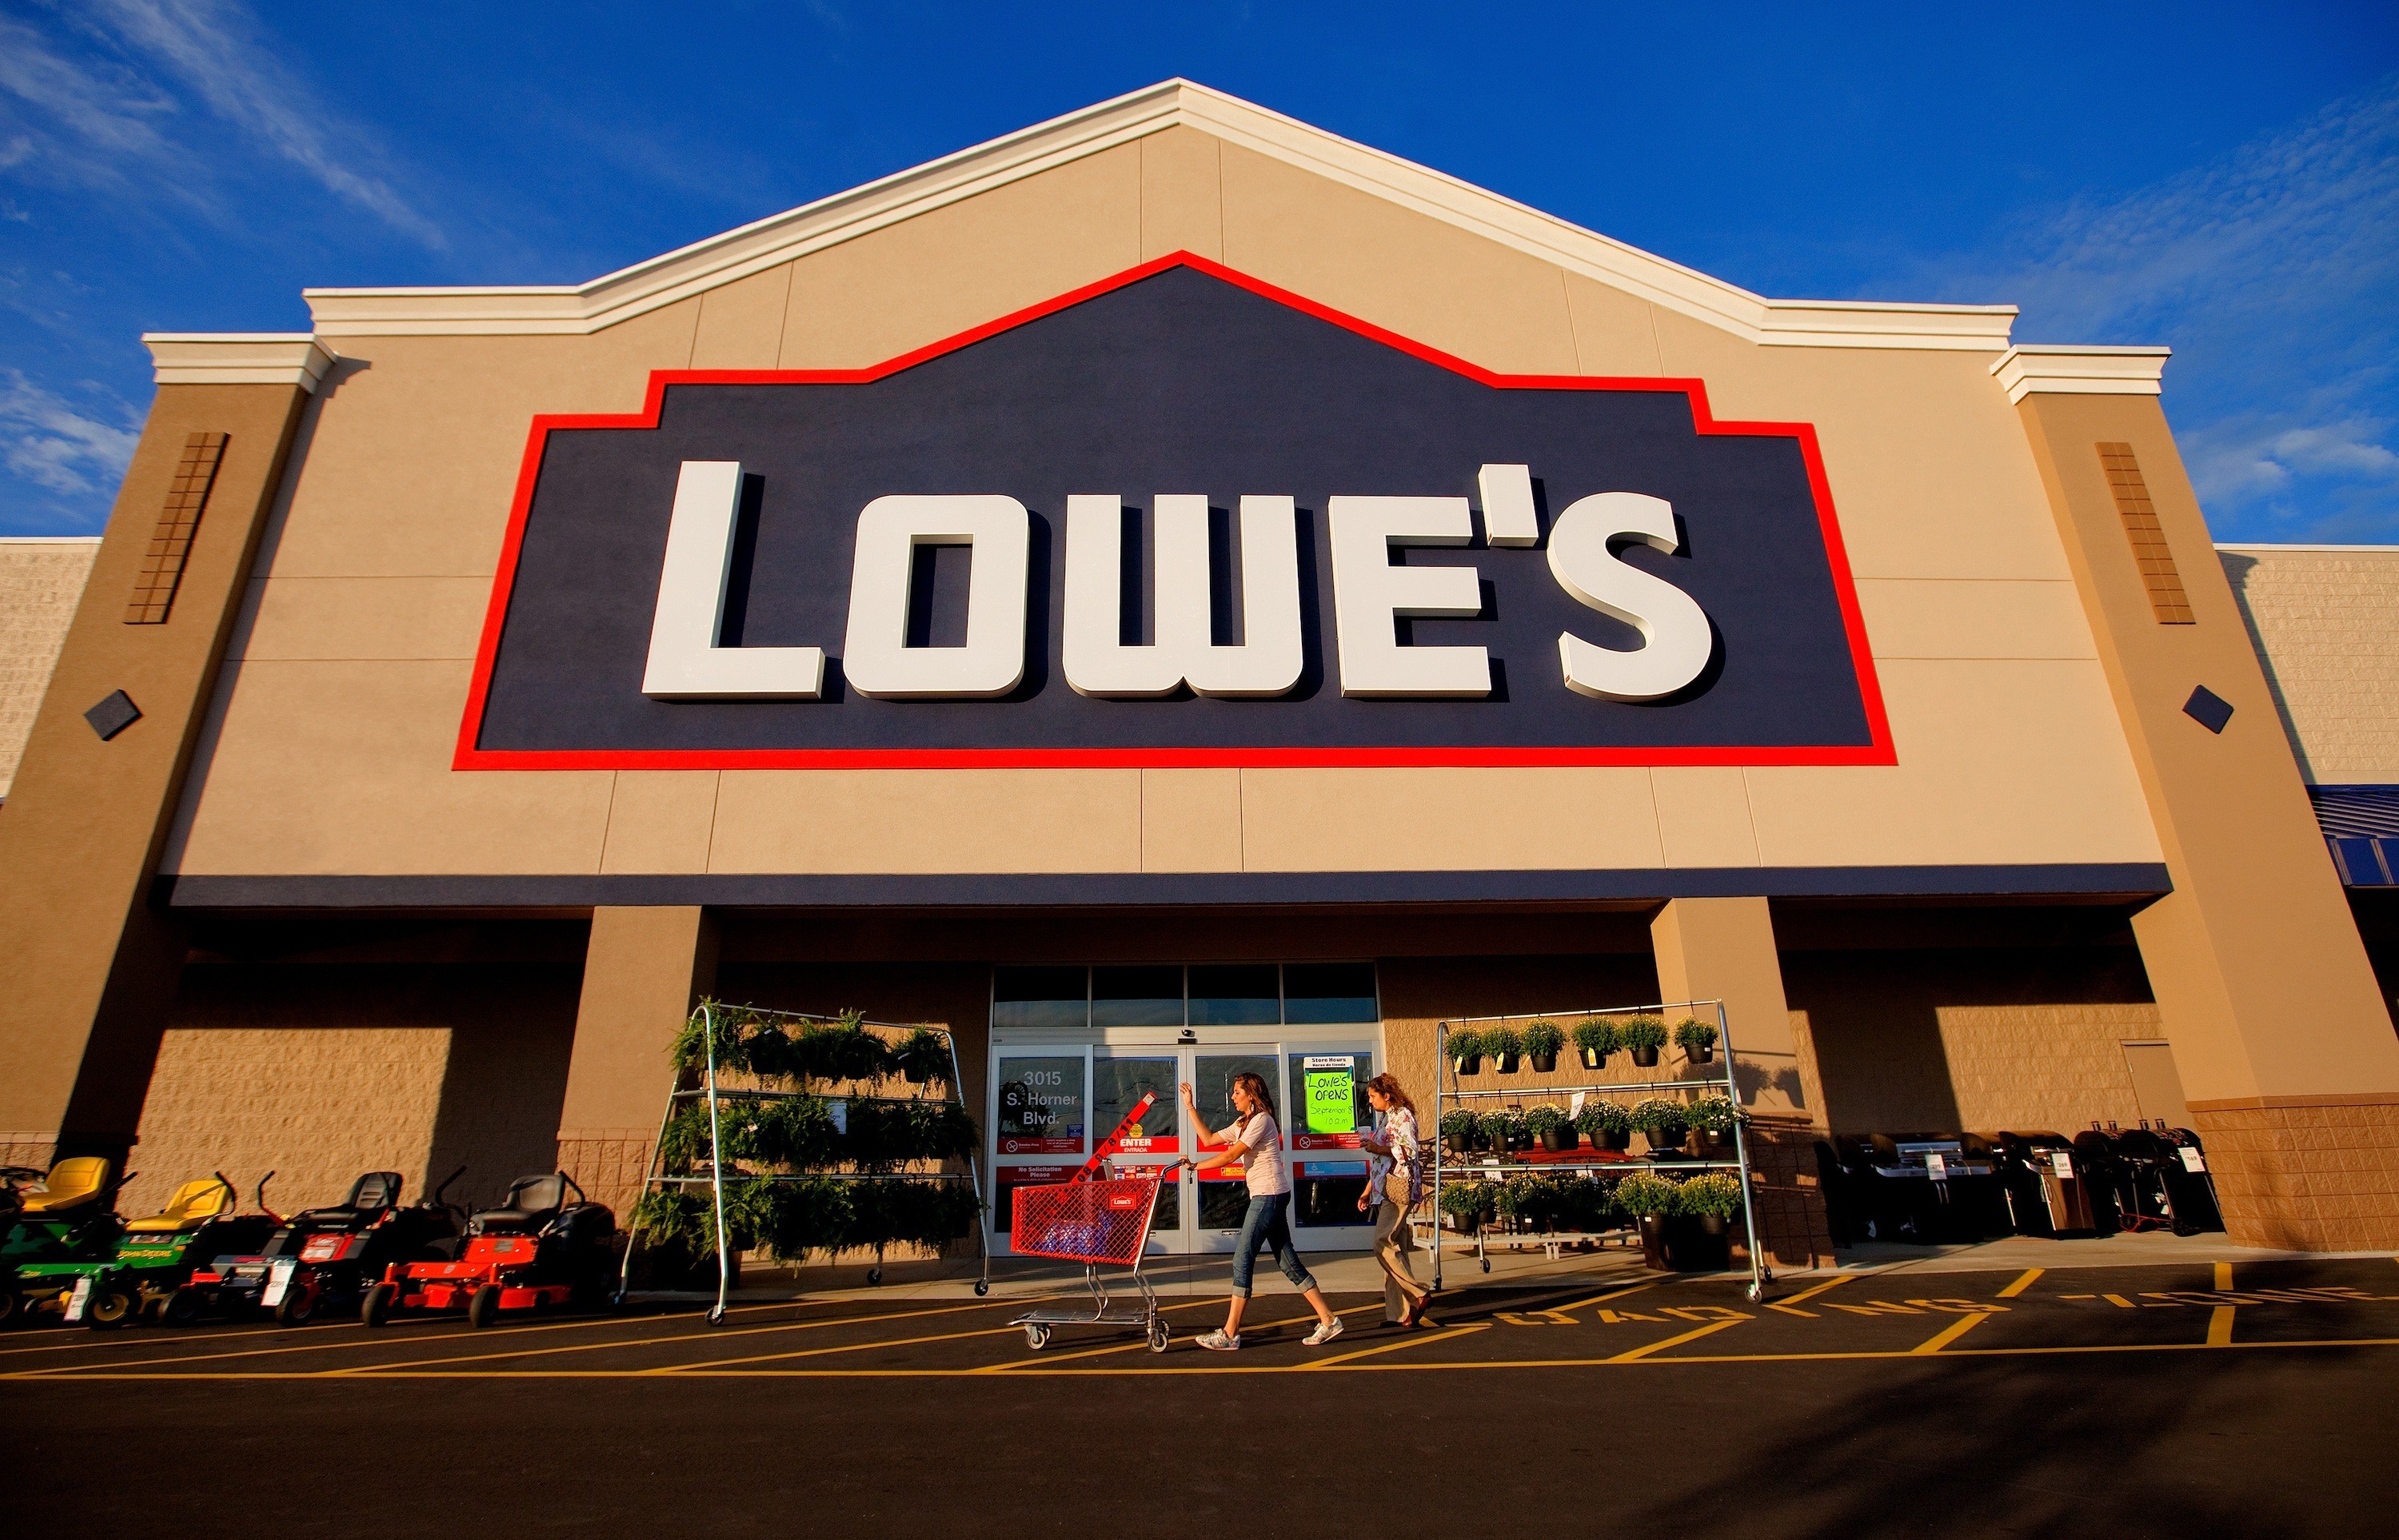 Save an EXTRA 10% at Lowe’s! $100 Gift Card only $90!